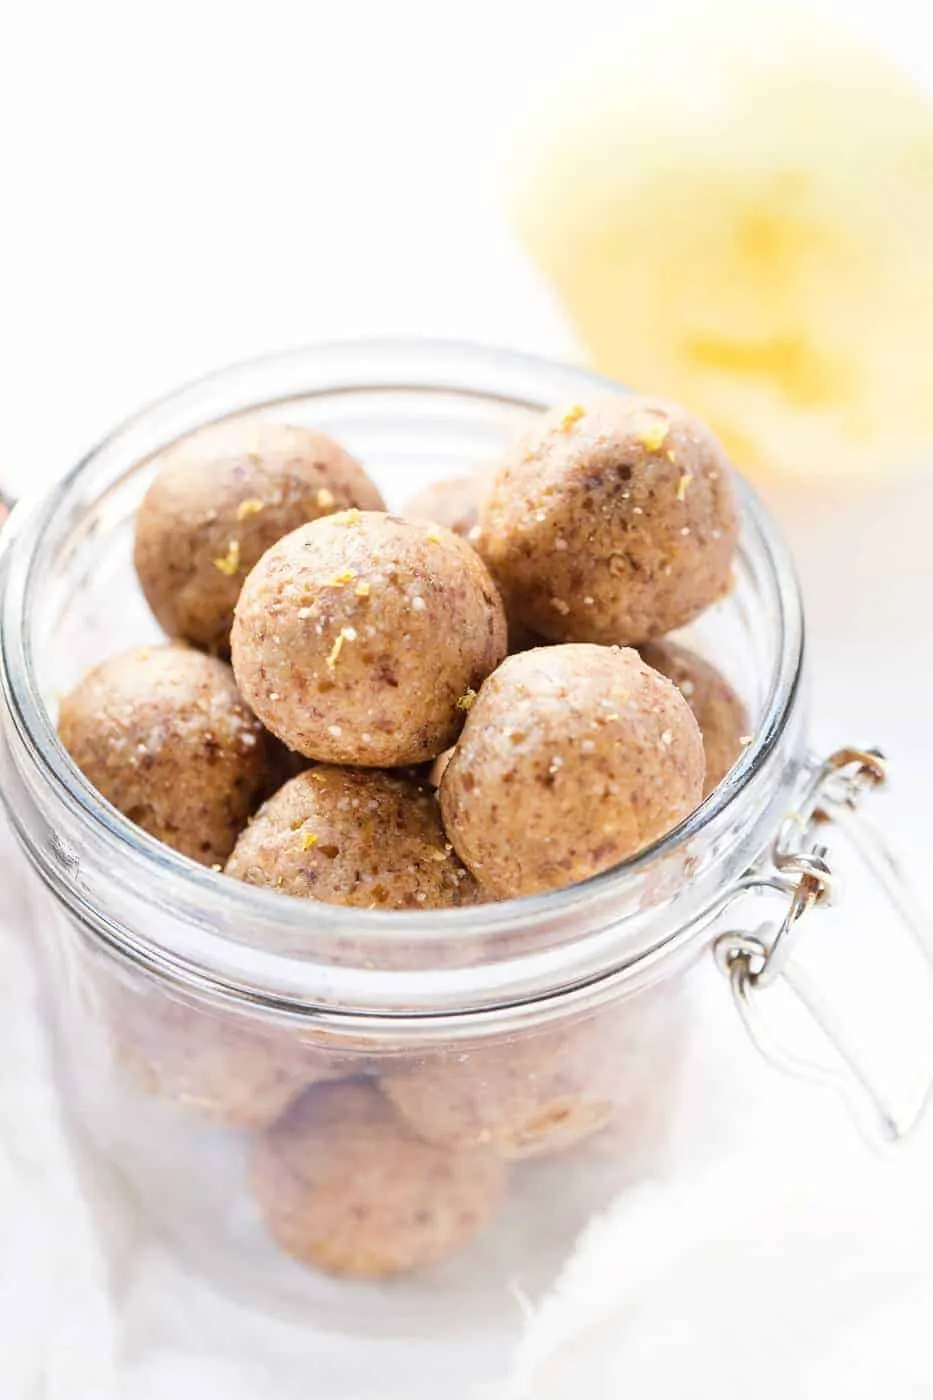 Go-Go Balls: Easy (and Healthy!) No-Bake Protein Ball Recipe Your Kids  Will Love! - Shelf Cooking